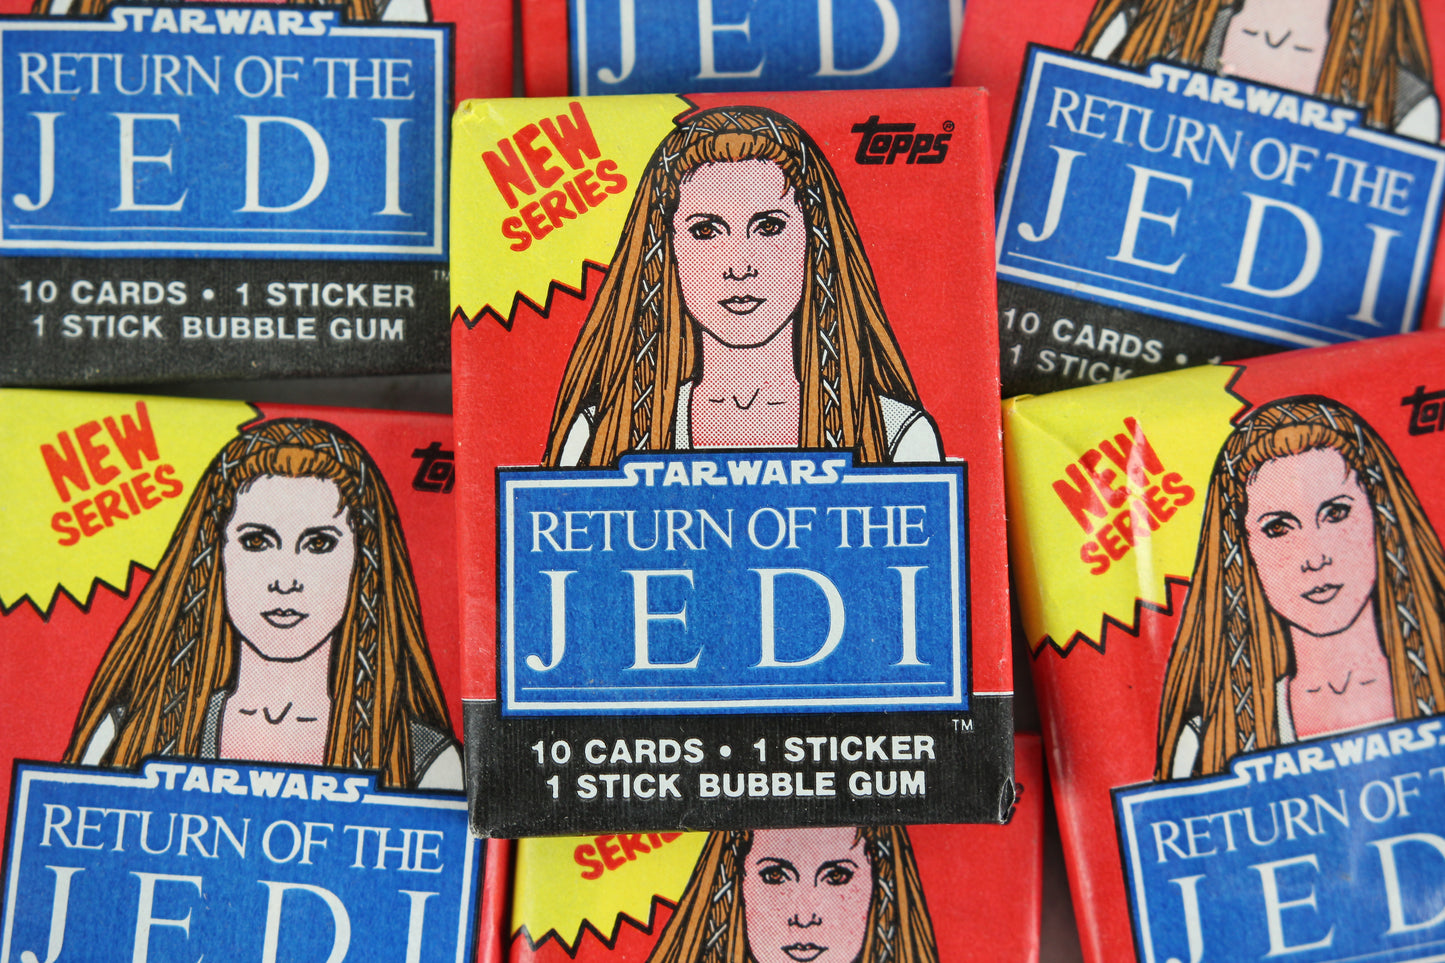 Topps Star Wars Return of the Jedi Series 2 Collectible Trading Cards, One Wax Pack, Leia Organa Wrapper, 1983